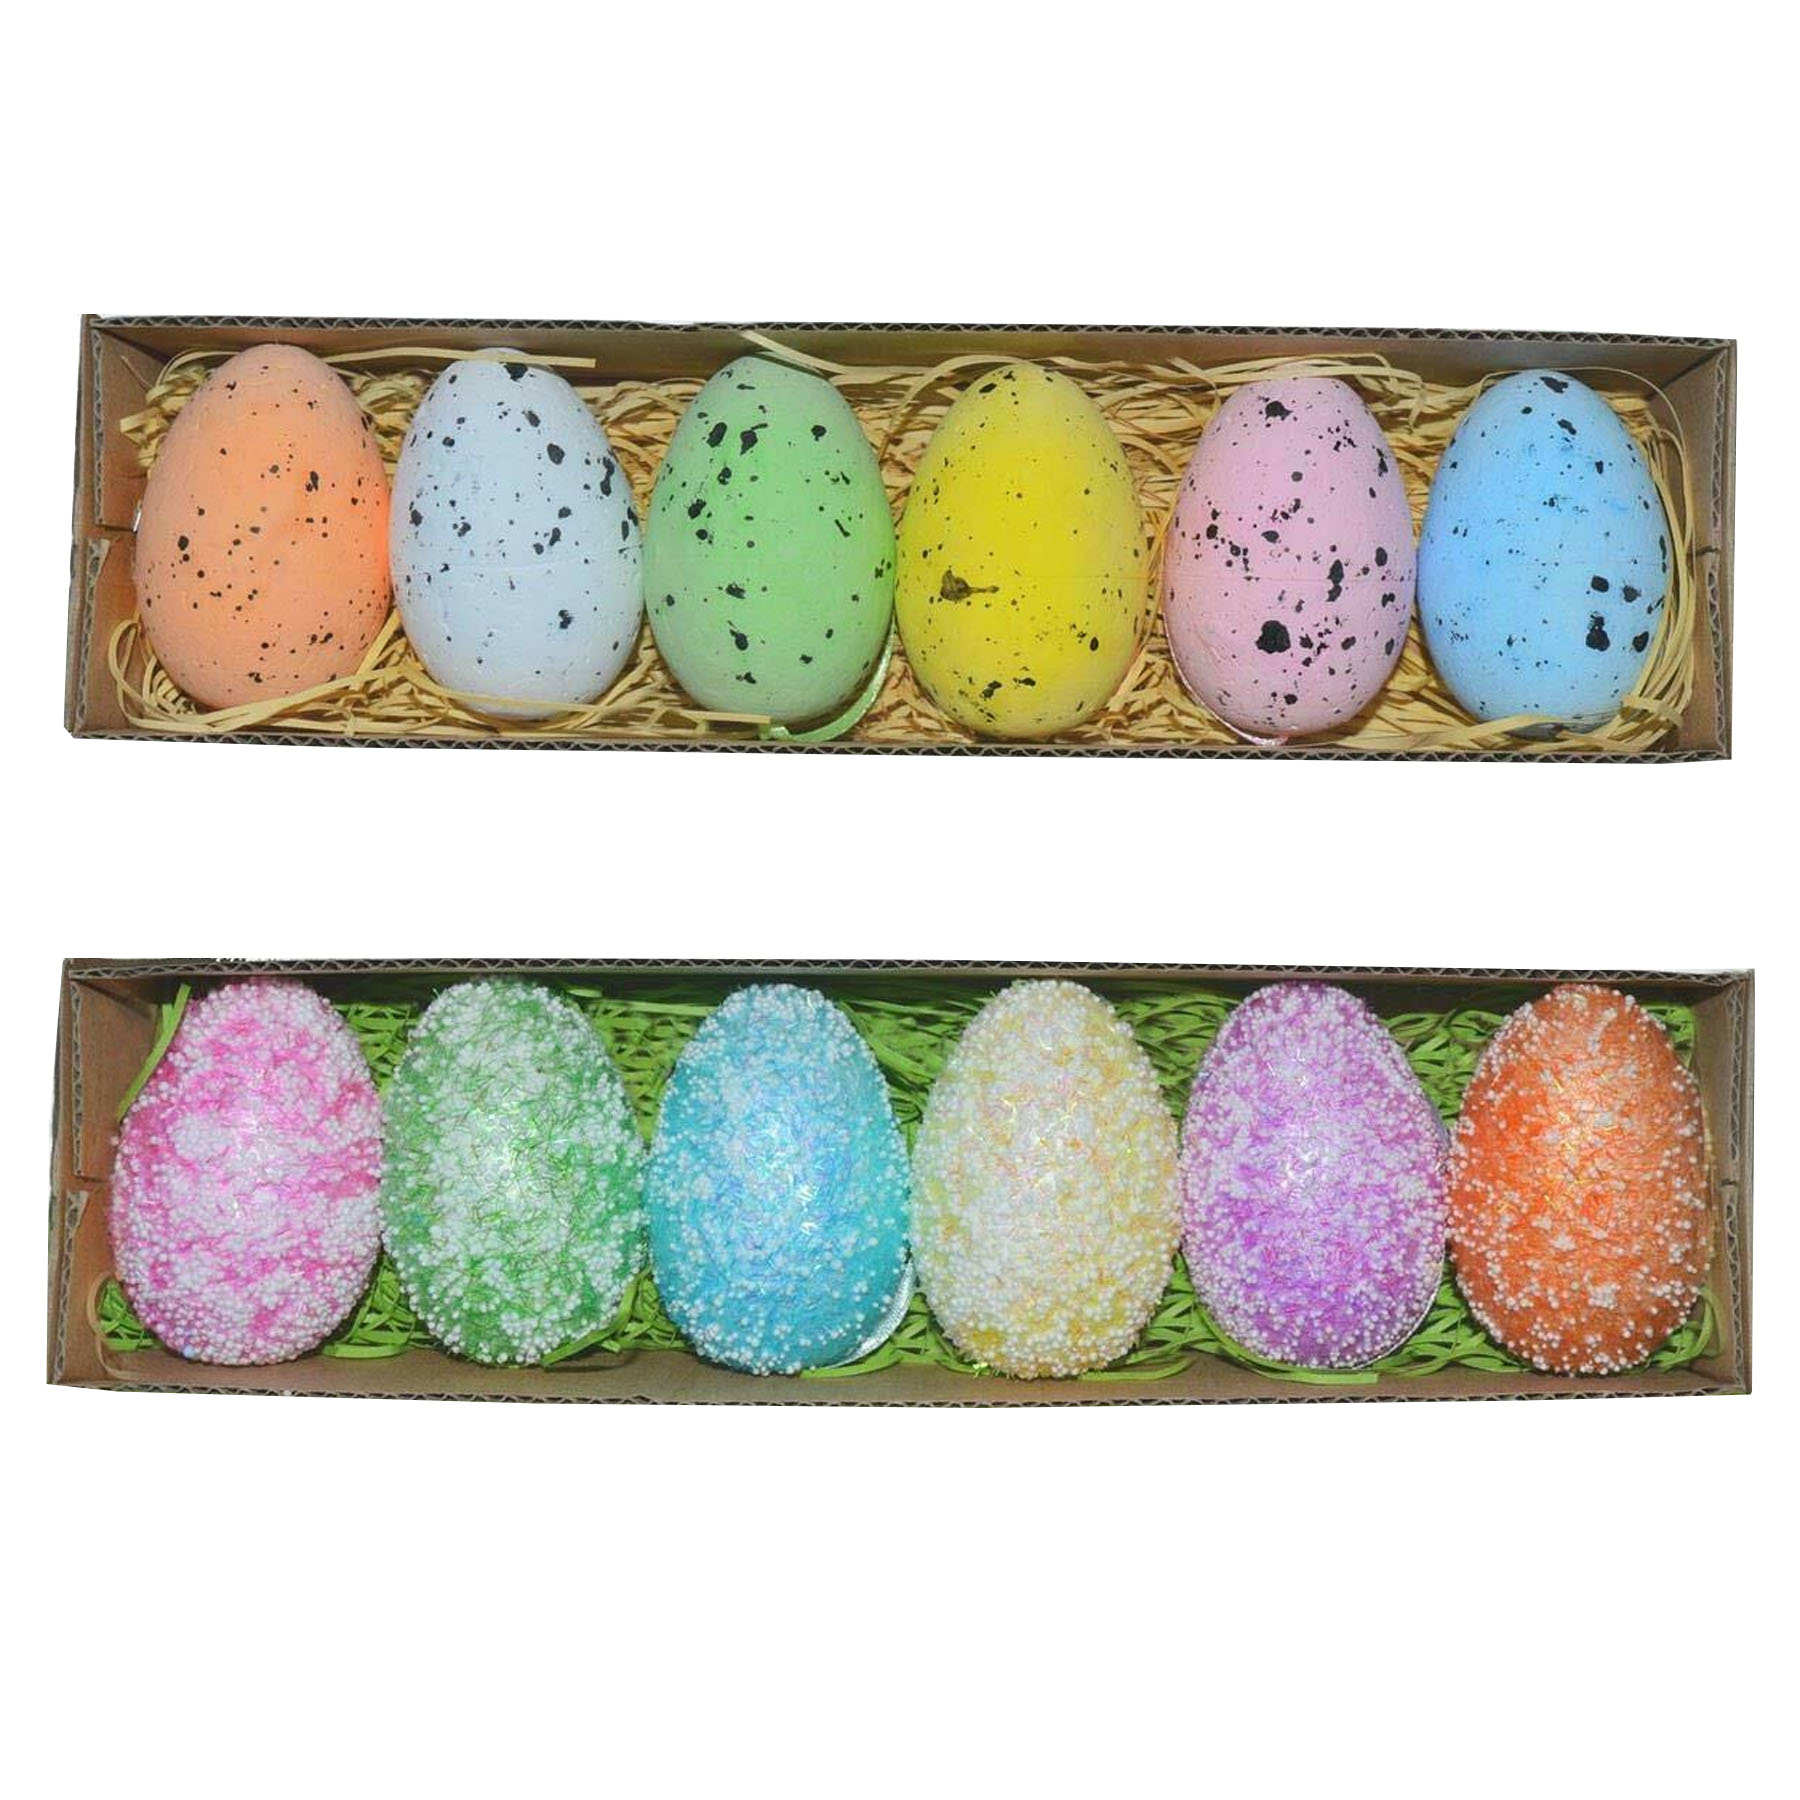 Easter Decorations, Bonnet Making, Arts and Crafts - 12 Pack Assorted Eggs